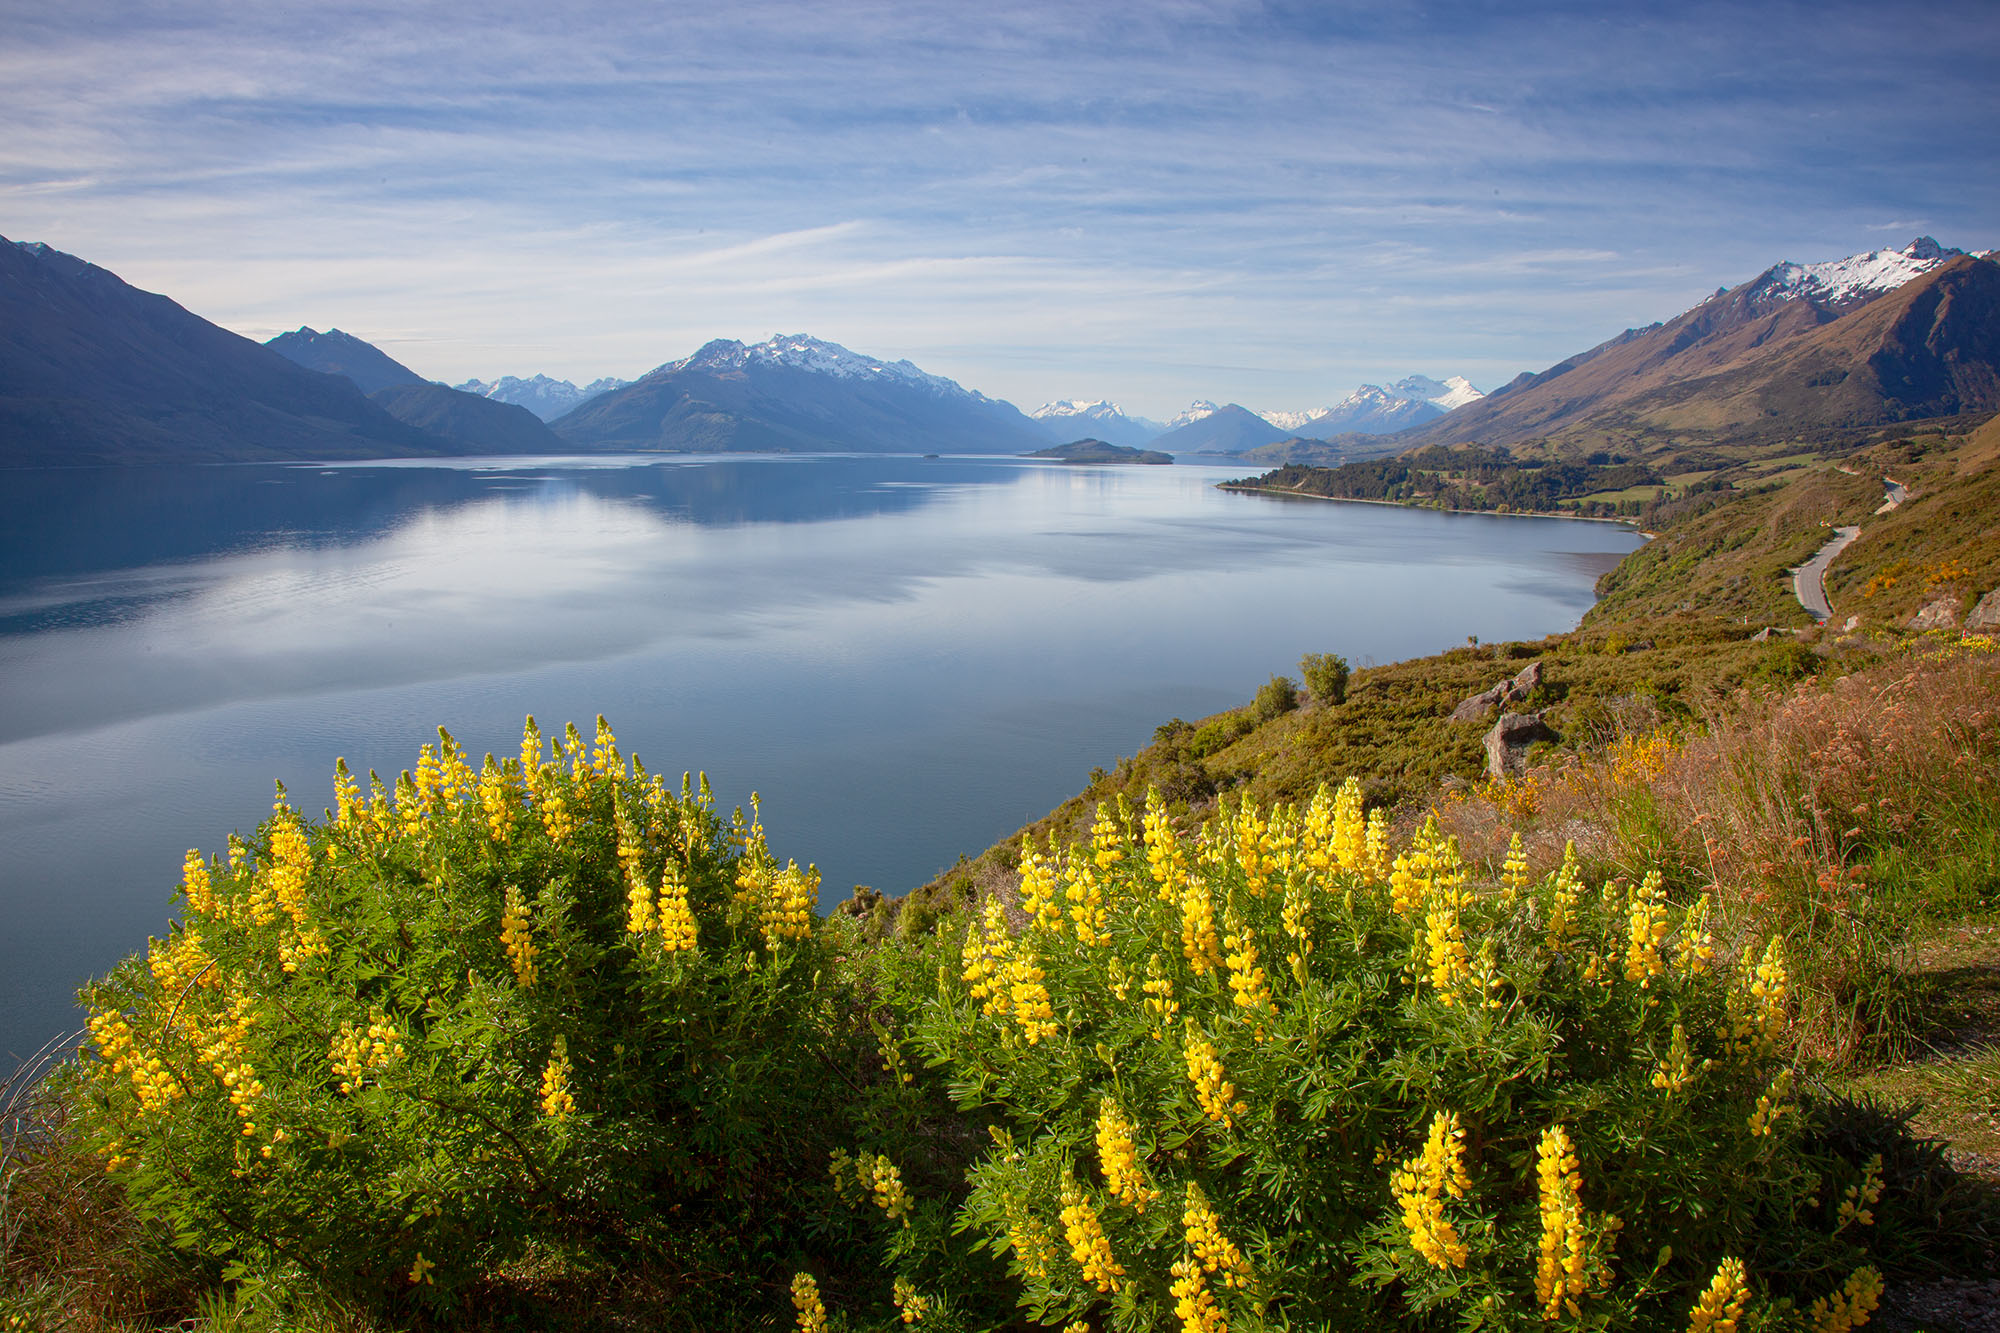 In this image, we capture the stunning beauty of Lake Wakatipu, New Zealand, adorned with vibrant yellow lupines. While journeying...